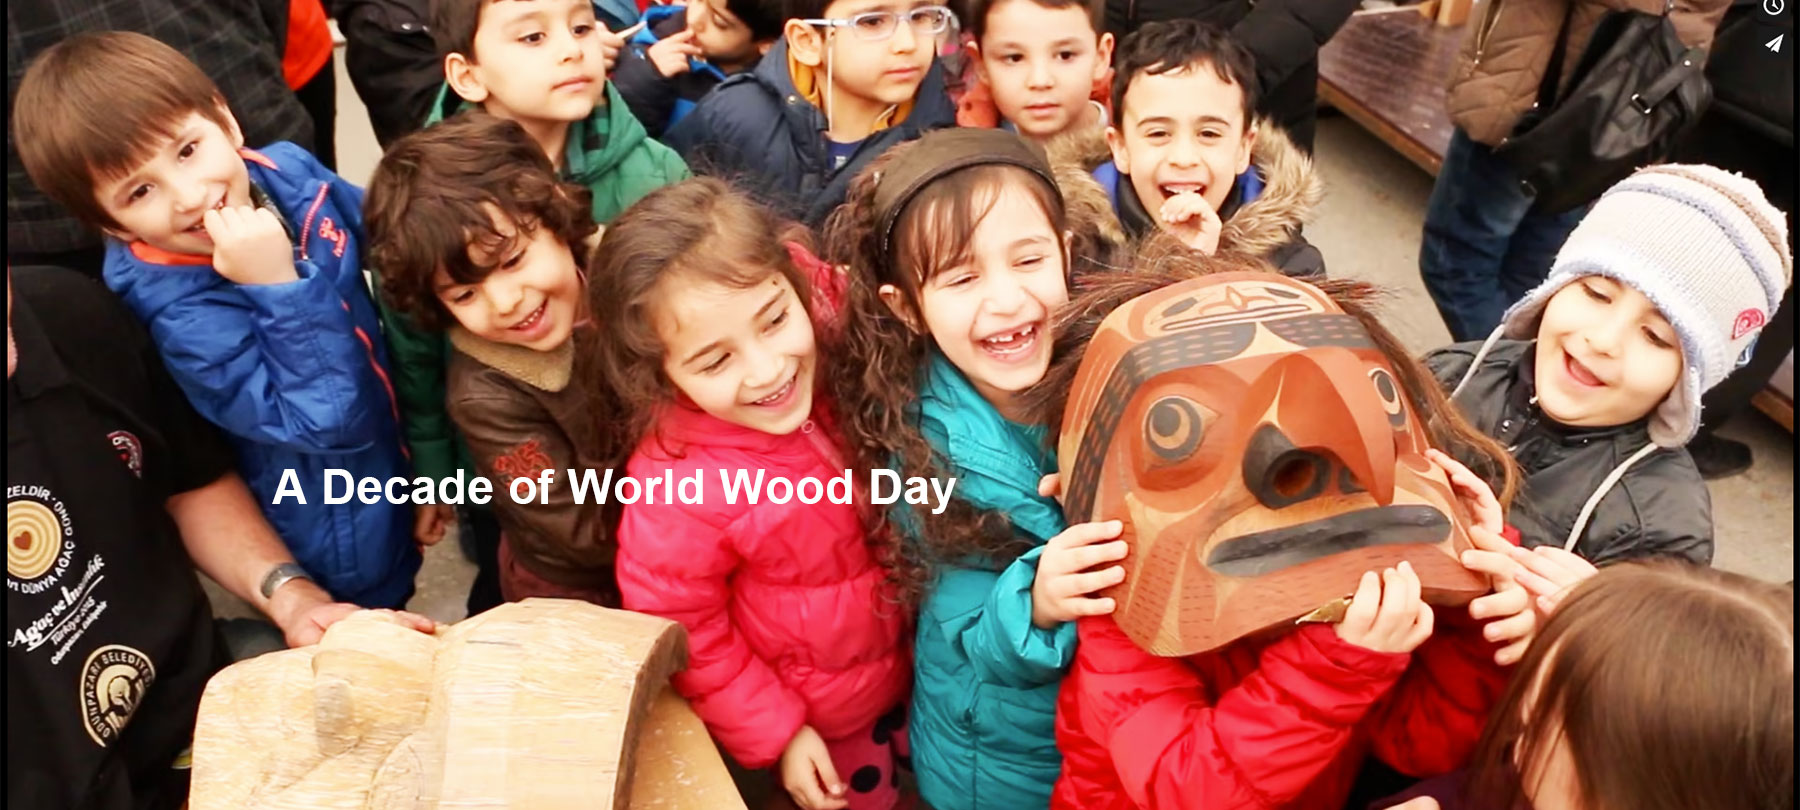 A Decade of World Wood Day